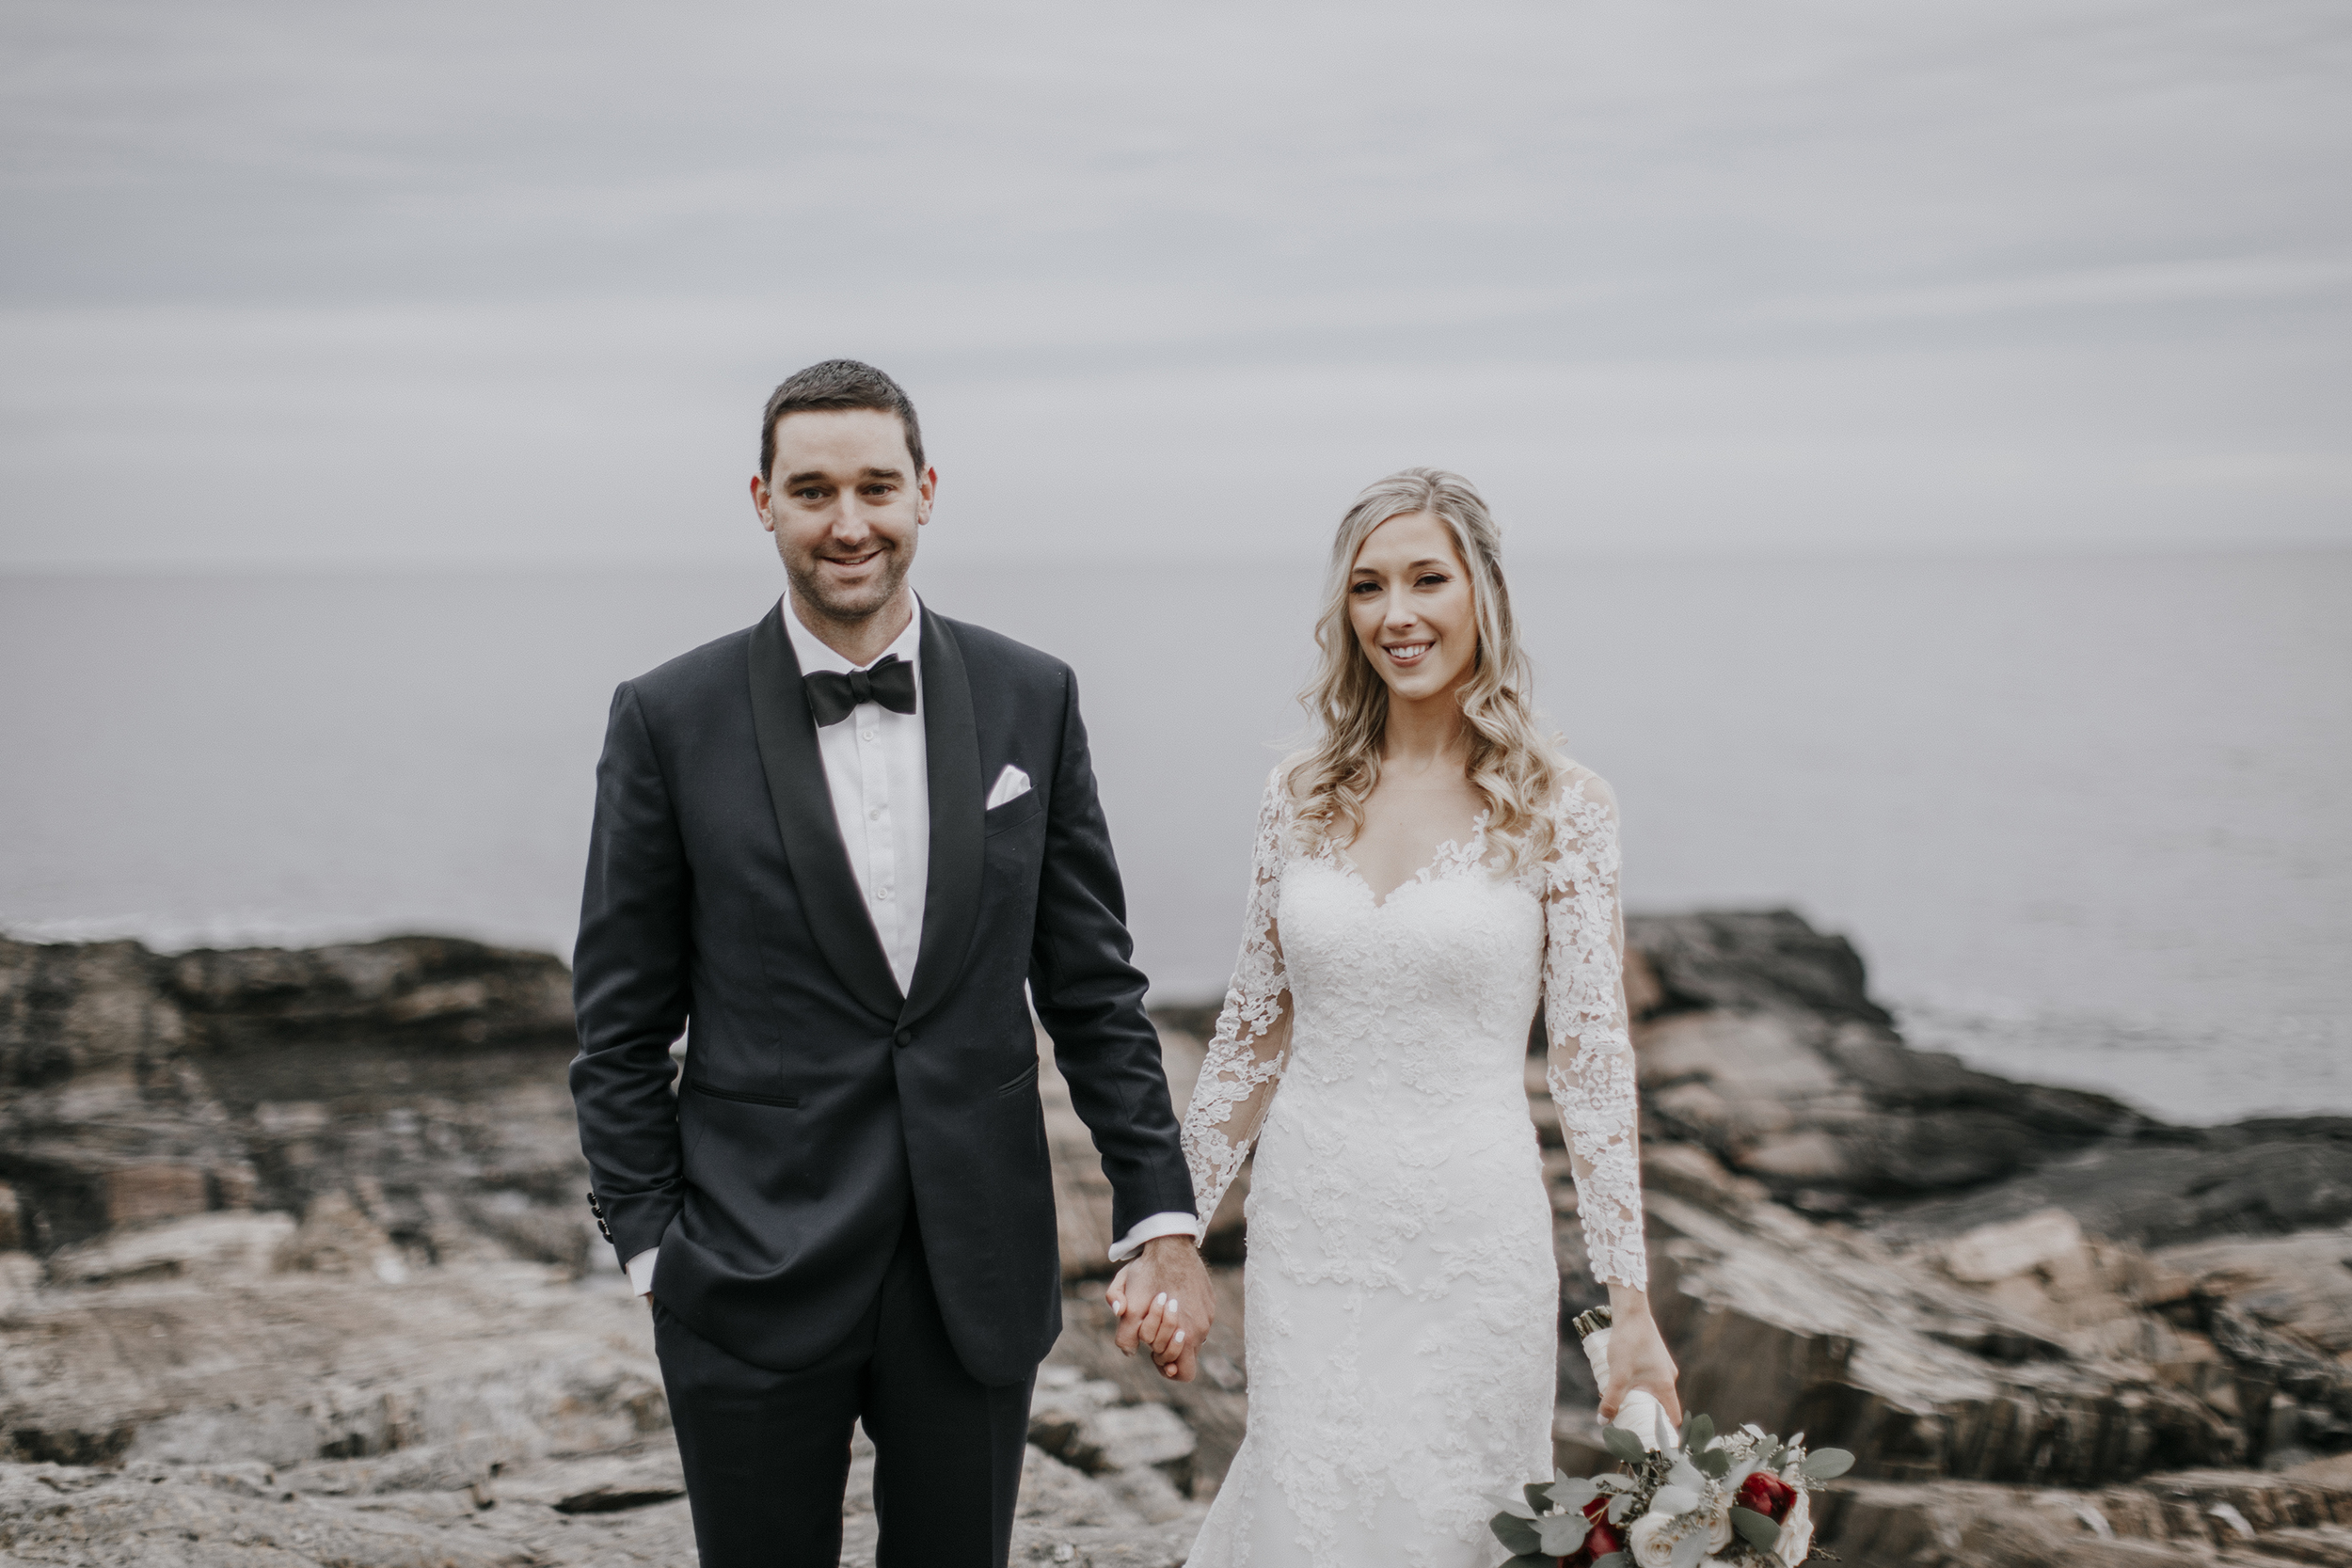 A wedding at cliff house, maine